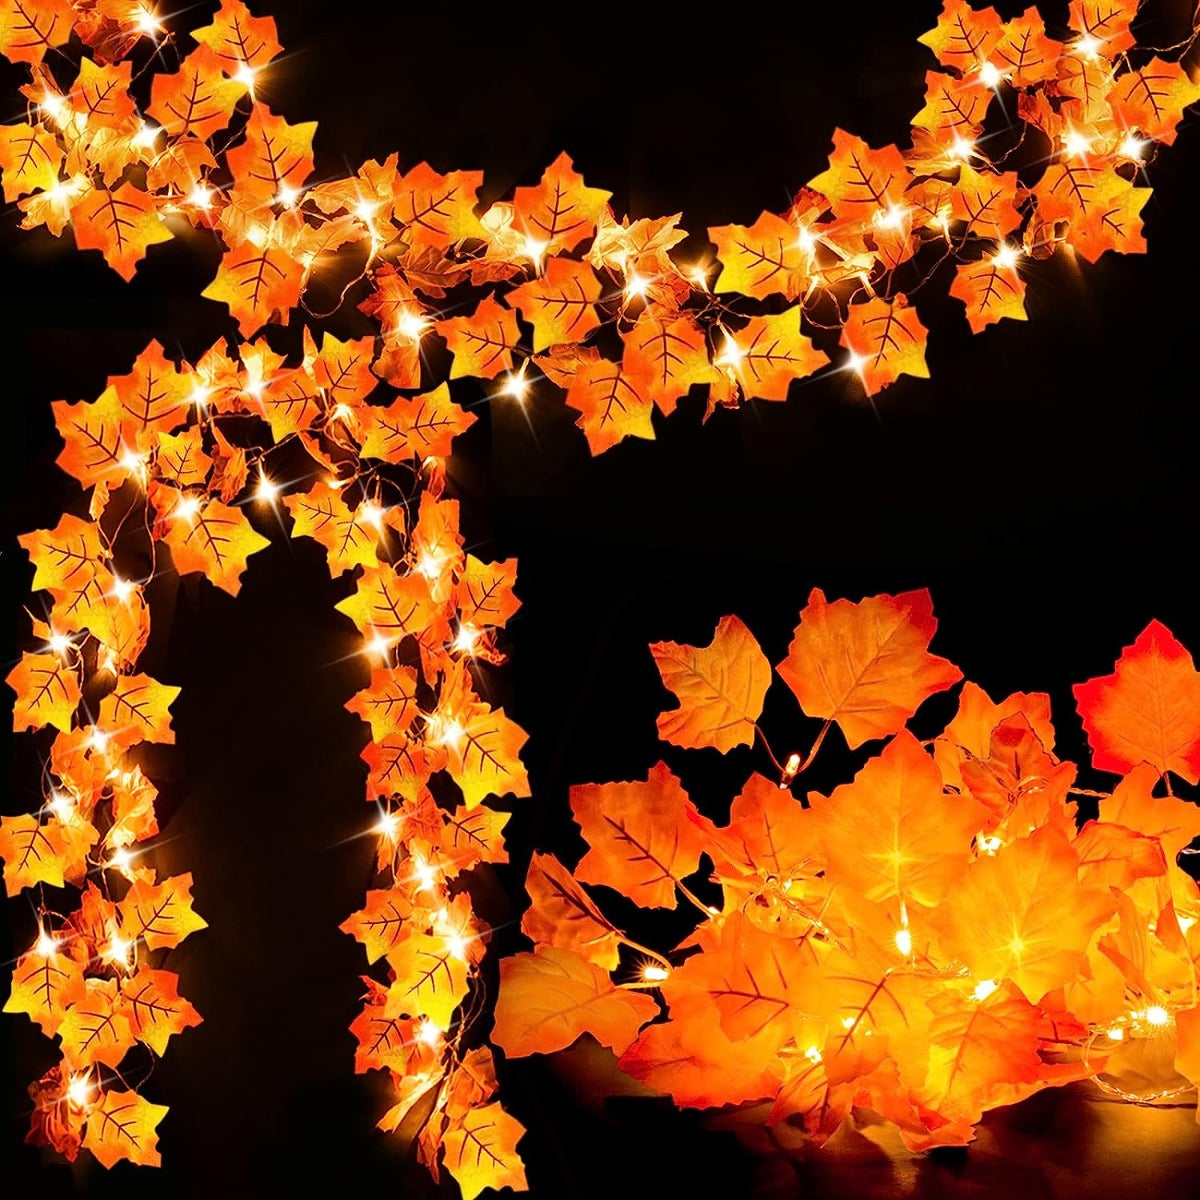 3-Pack Fall Garland Lights Thanksgiving, Christmas, and Halloween Decorations - 60 LED Lights, 20 Ft Waterproof Battery Powered.